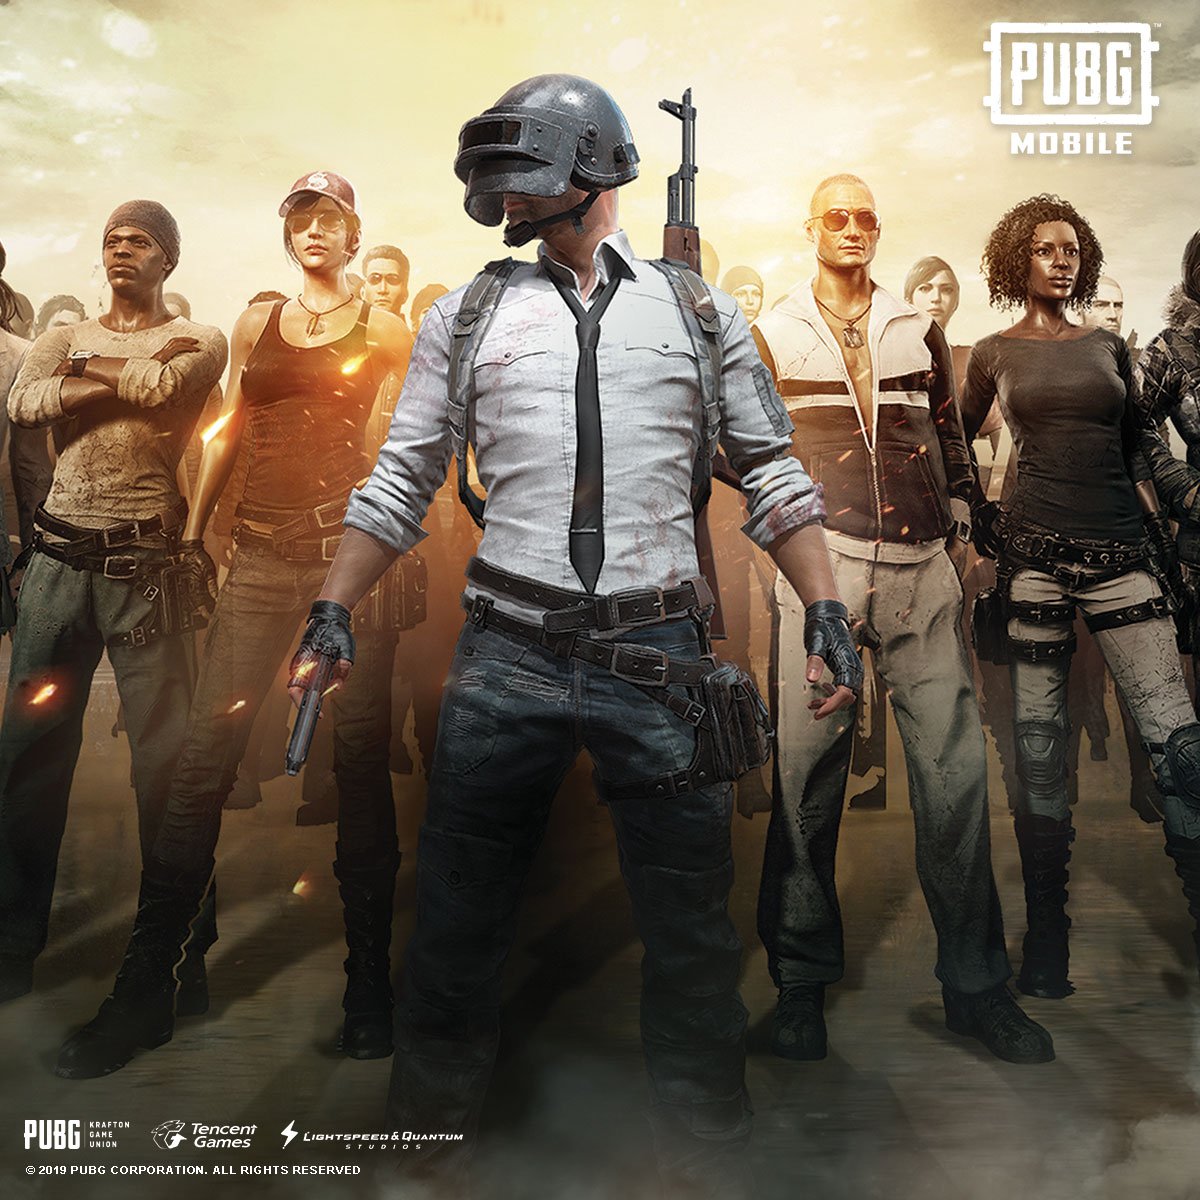 Pubg Mobile We Continue To Remove Cheating Players From Pubg Mobile Visit Our Website For A Partial List Of Players Banned Between July 9 And July 15 And Please Keep